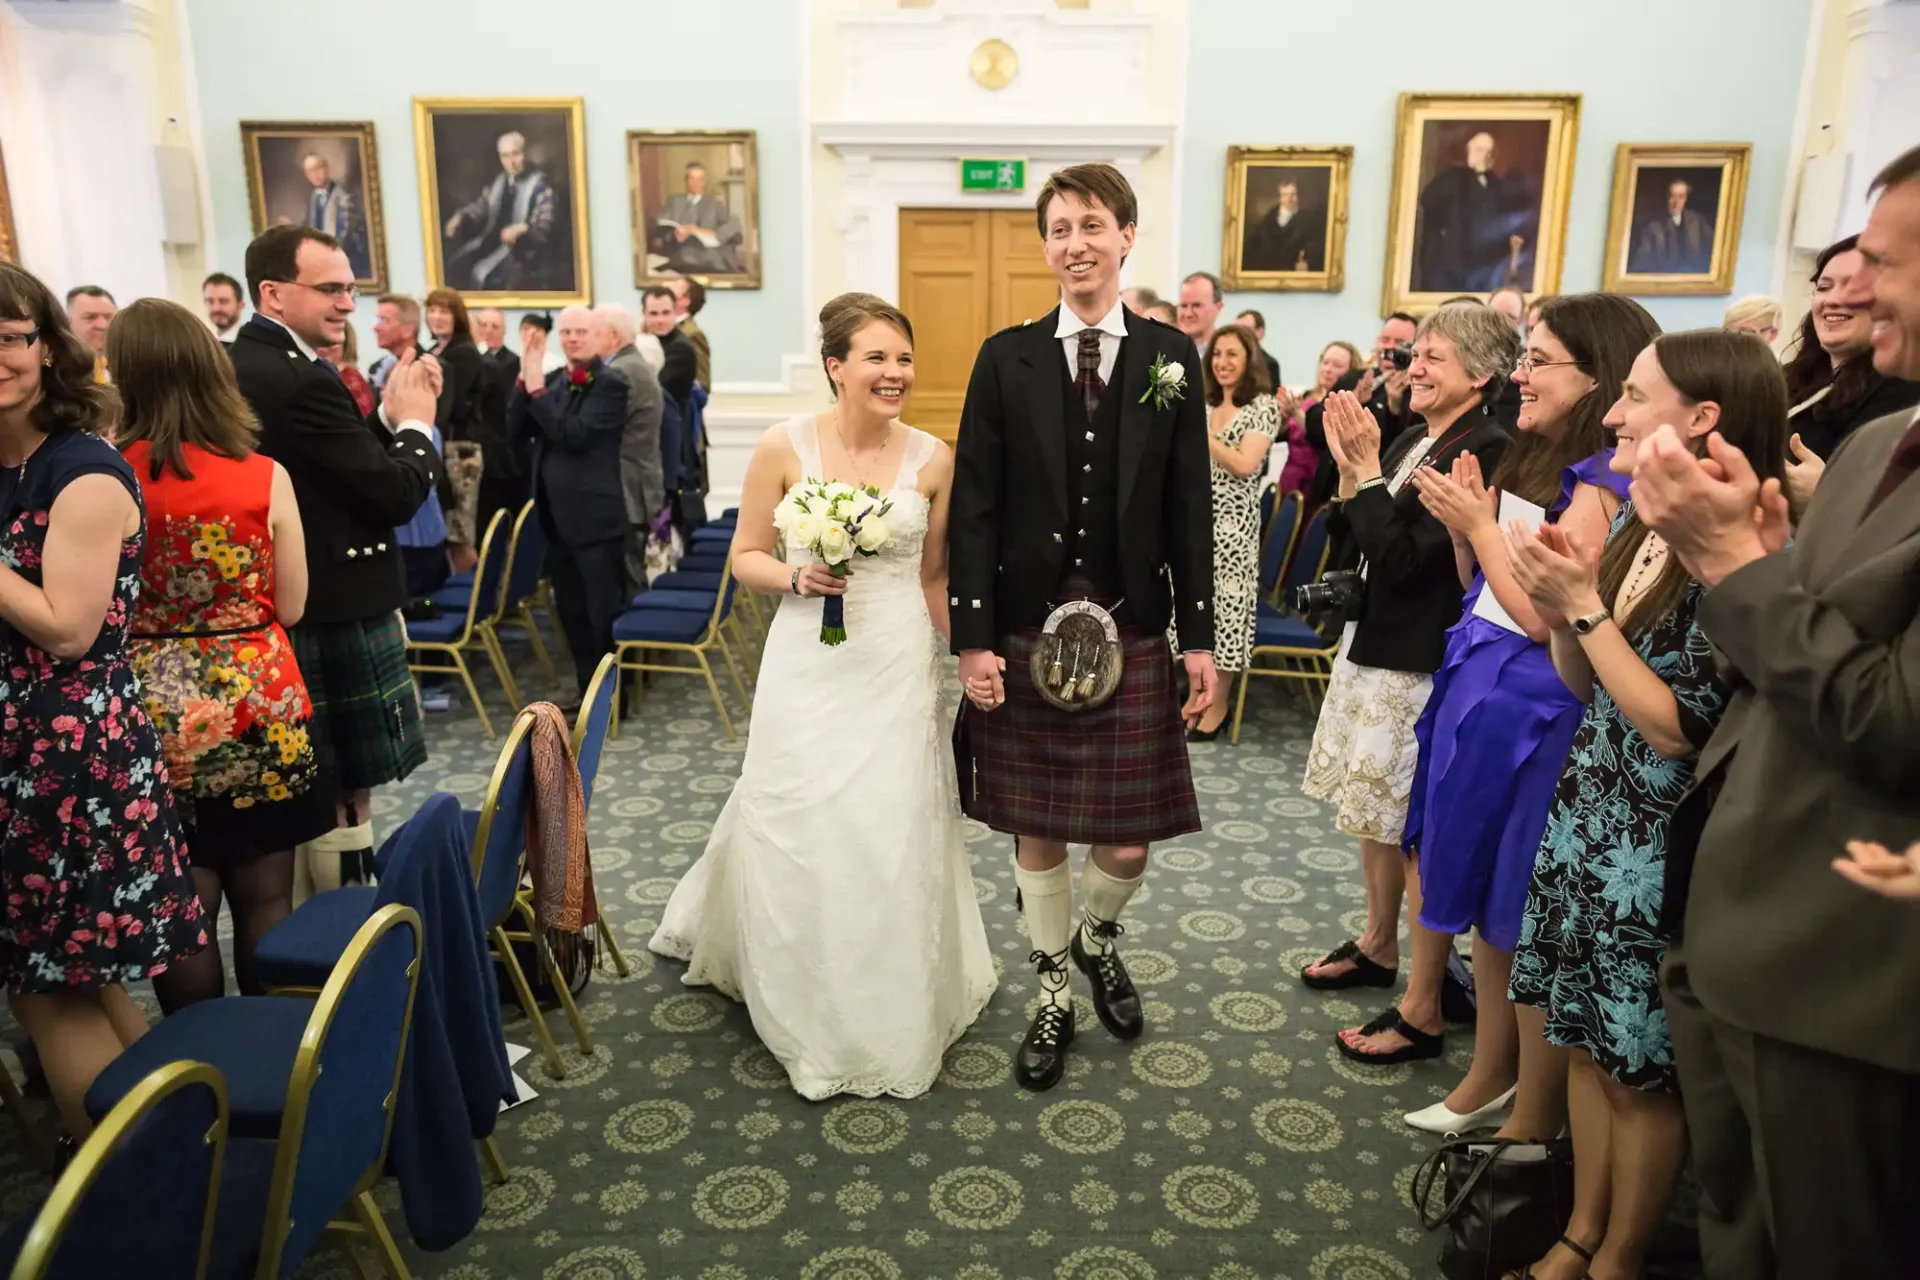 A newlywed couple smiling as they walk through a crowd of clapping guests in a hall adorned with portraits.